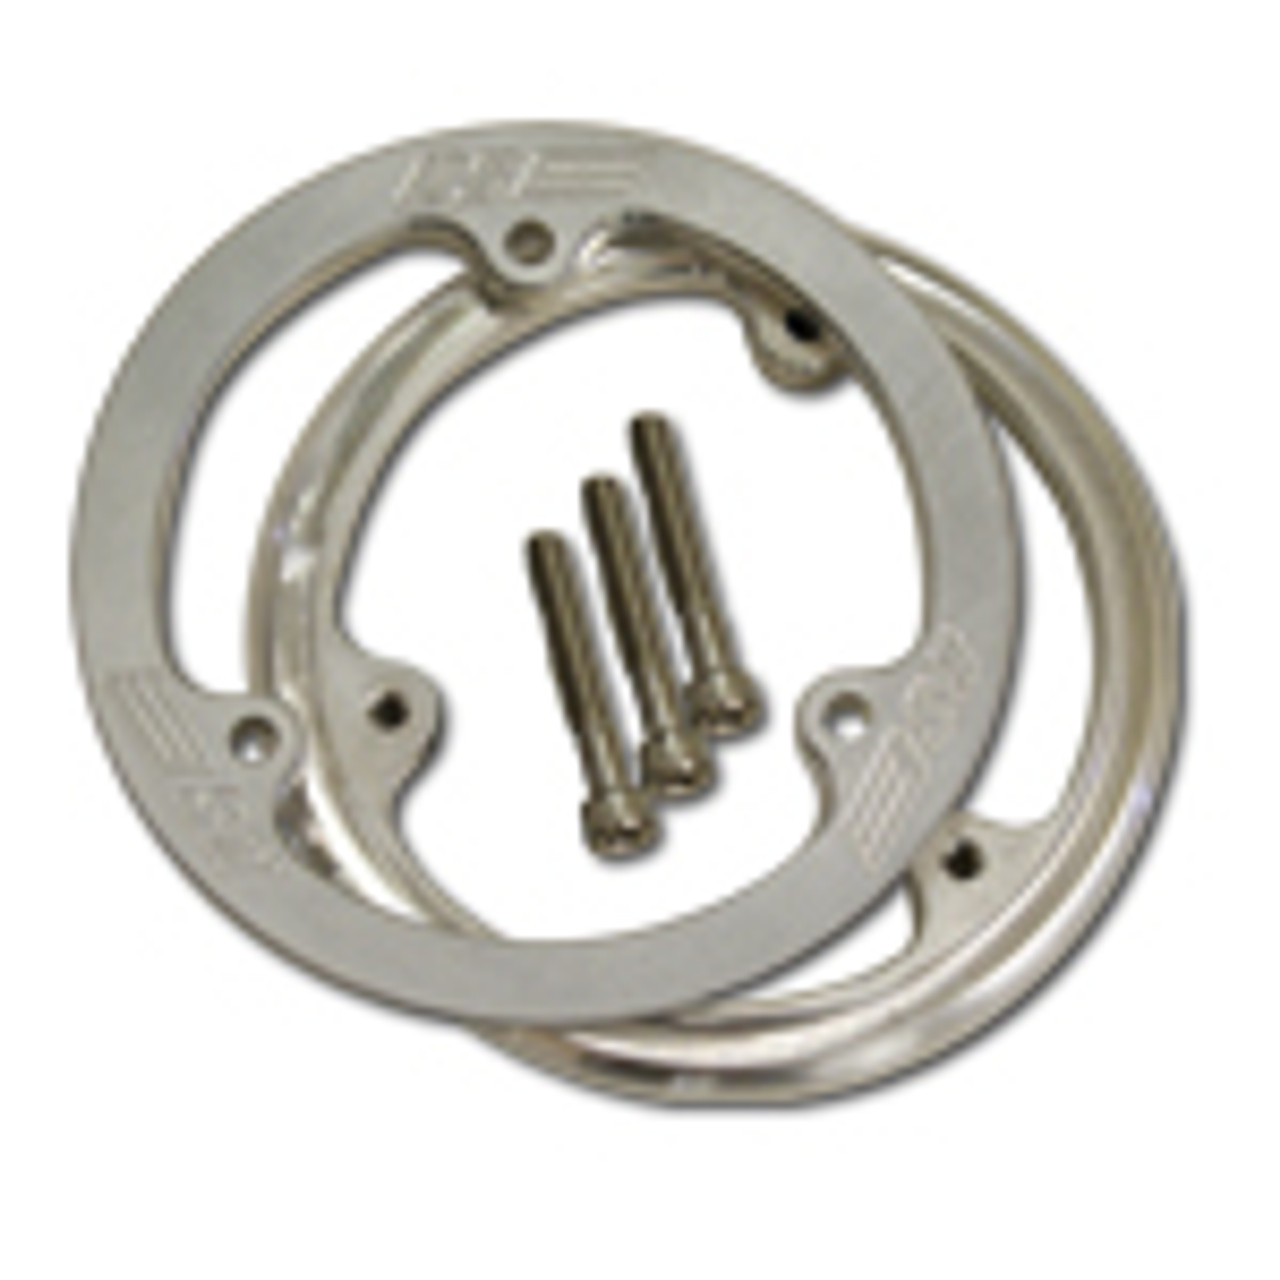 40T PULLEY GUIDE SET